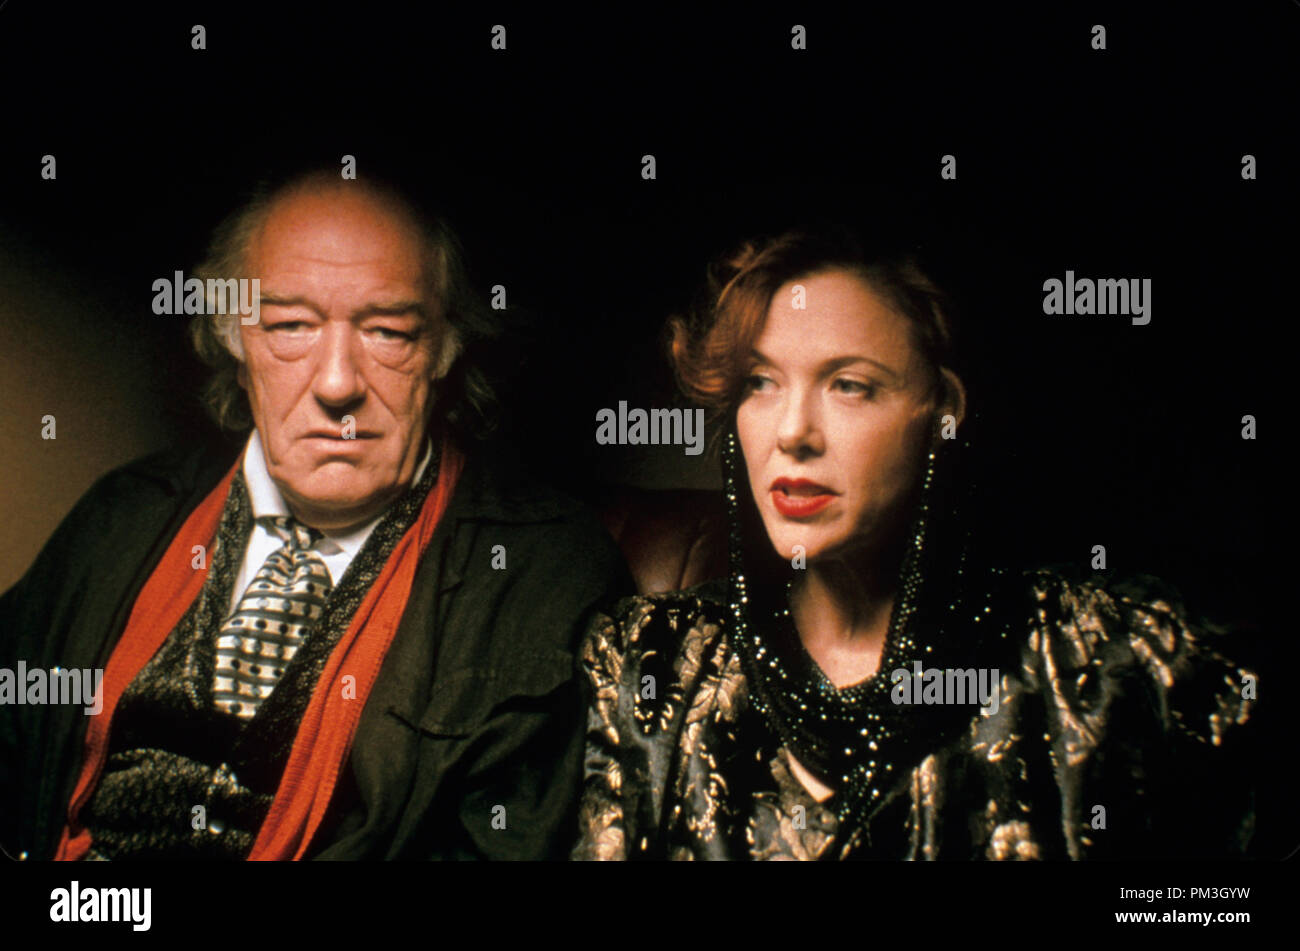 Film Still from 'Being Julia' Michael Gambon, Annette Bening © 2004 Sony Pictures Photo Alex Dukay  File Reference # 30735724THA  For Editorial Use Only -  All Rights Reserved Stock Photo